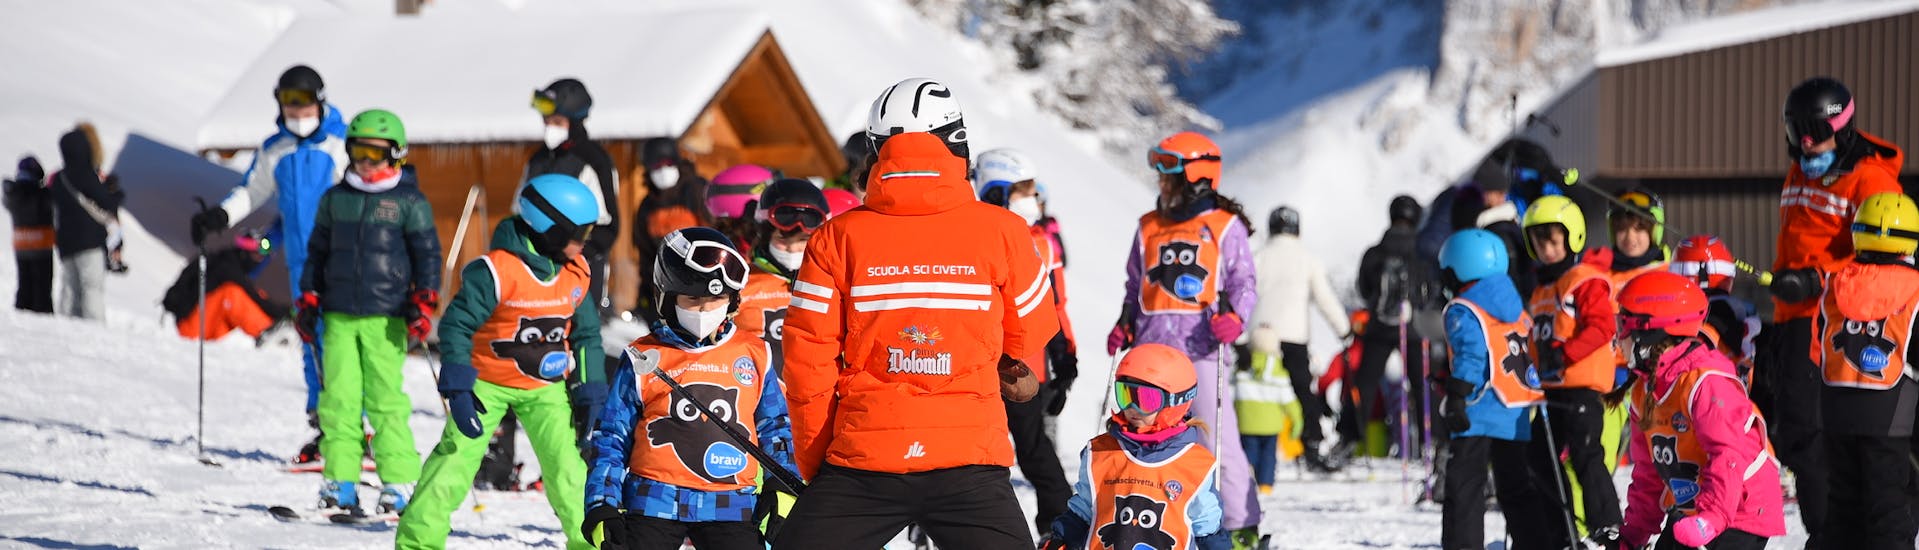 Kids during the Kids Ski Lessons (5-12 y.) for All Levels from Scuola Sci Civetta - Val di Zoldo Pecol.